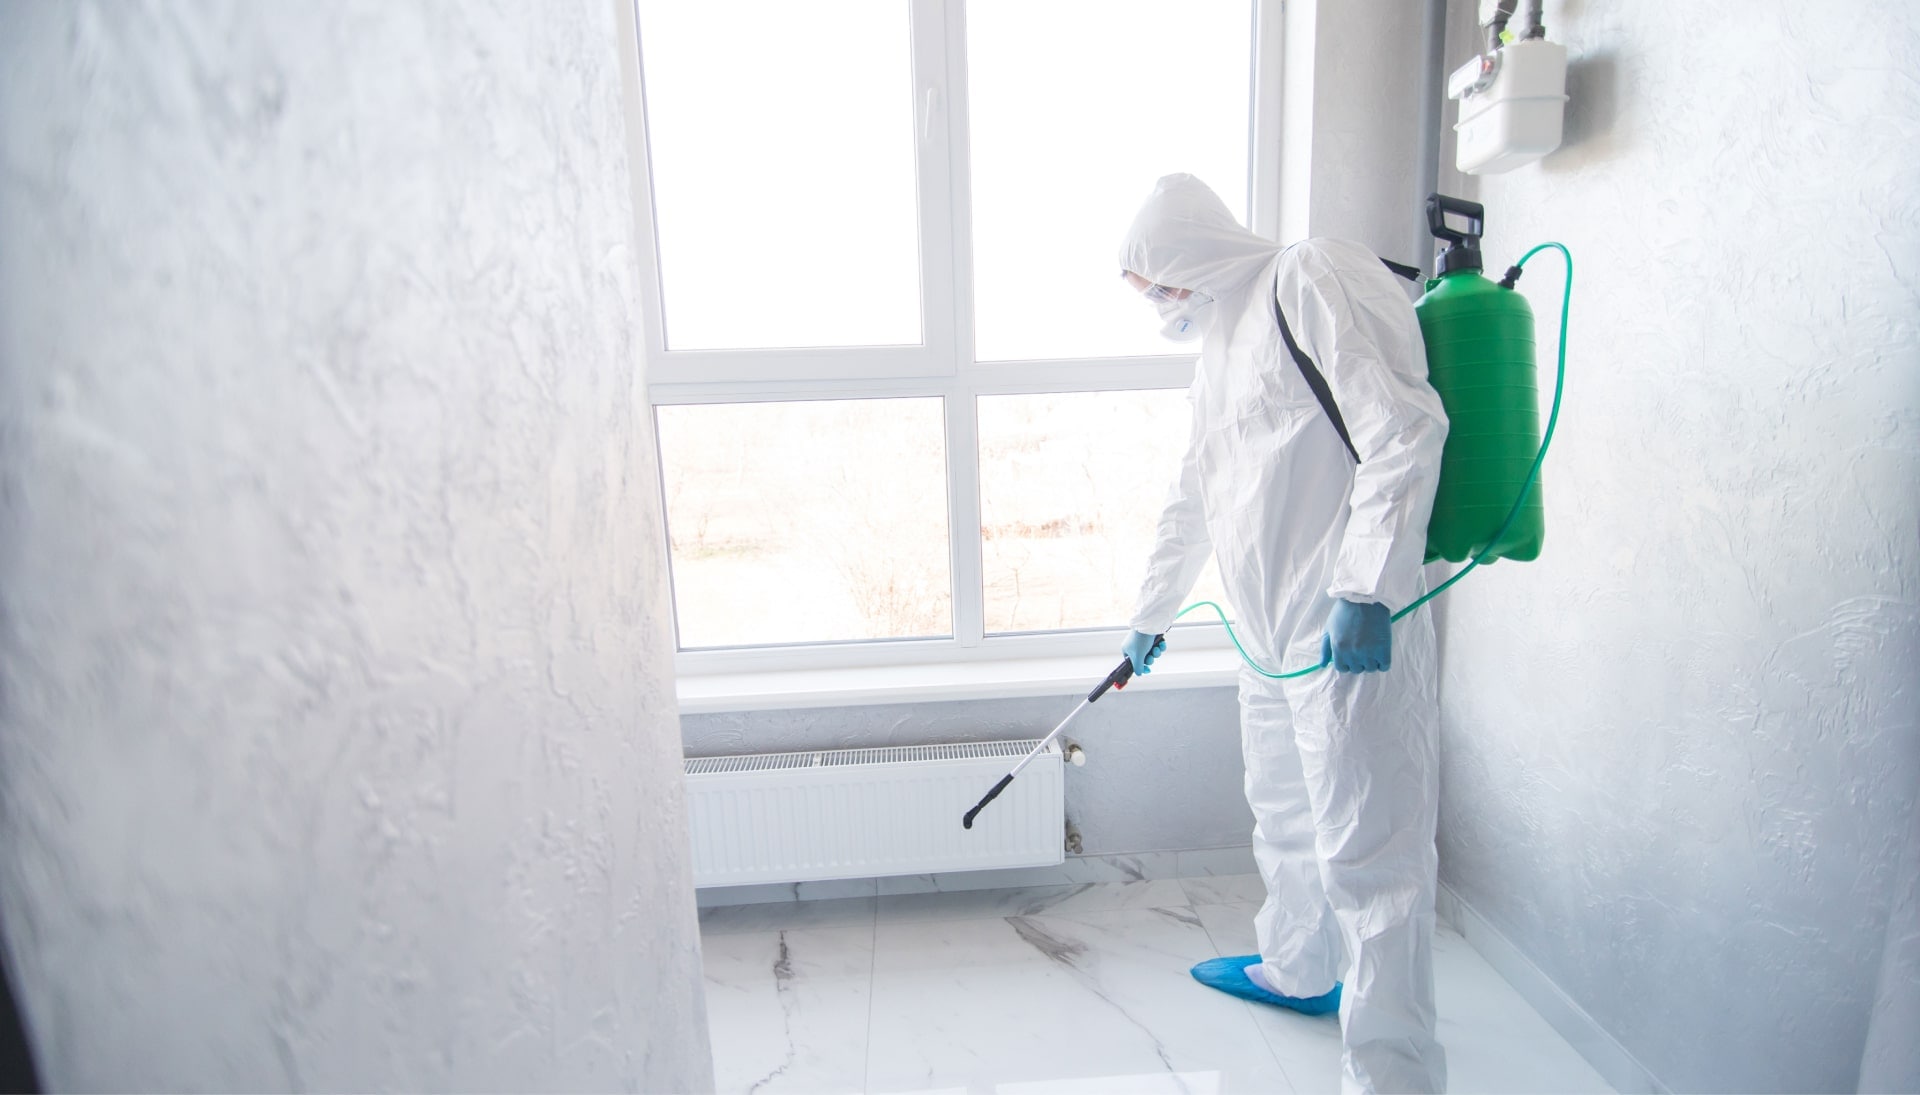 We provide the highest-quality mold inspection, testing, and removal services in the Madison, Wisconsin area.